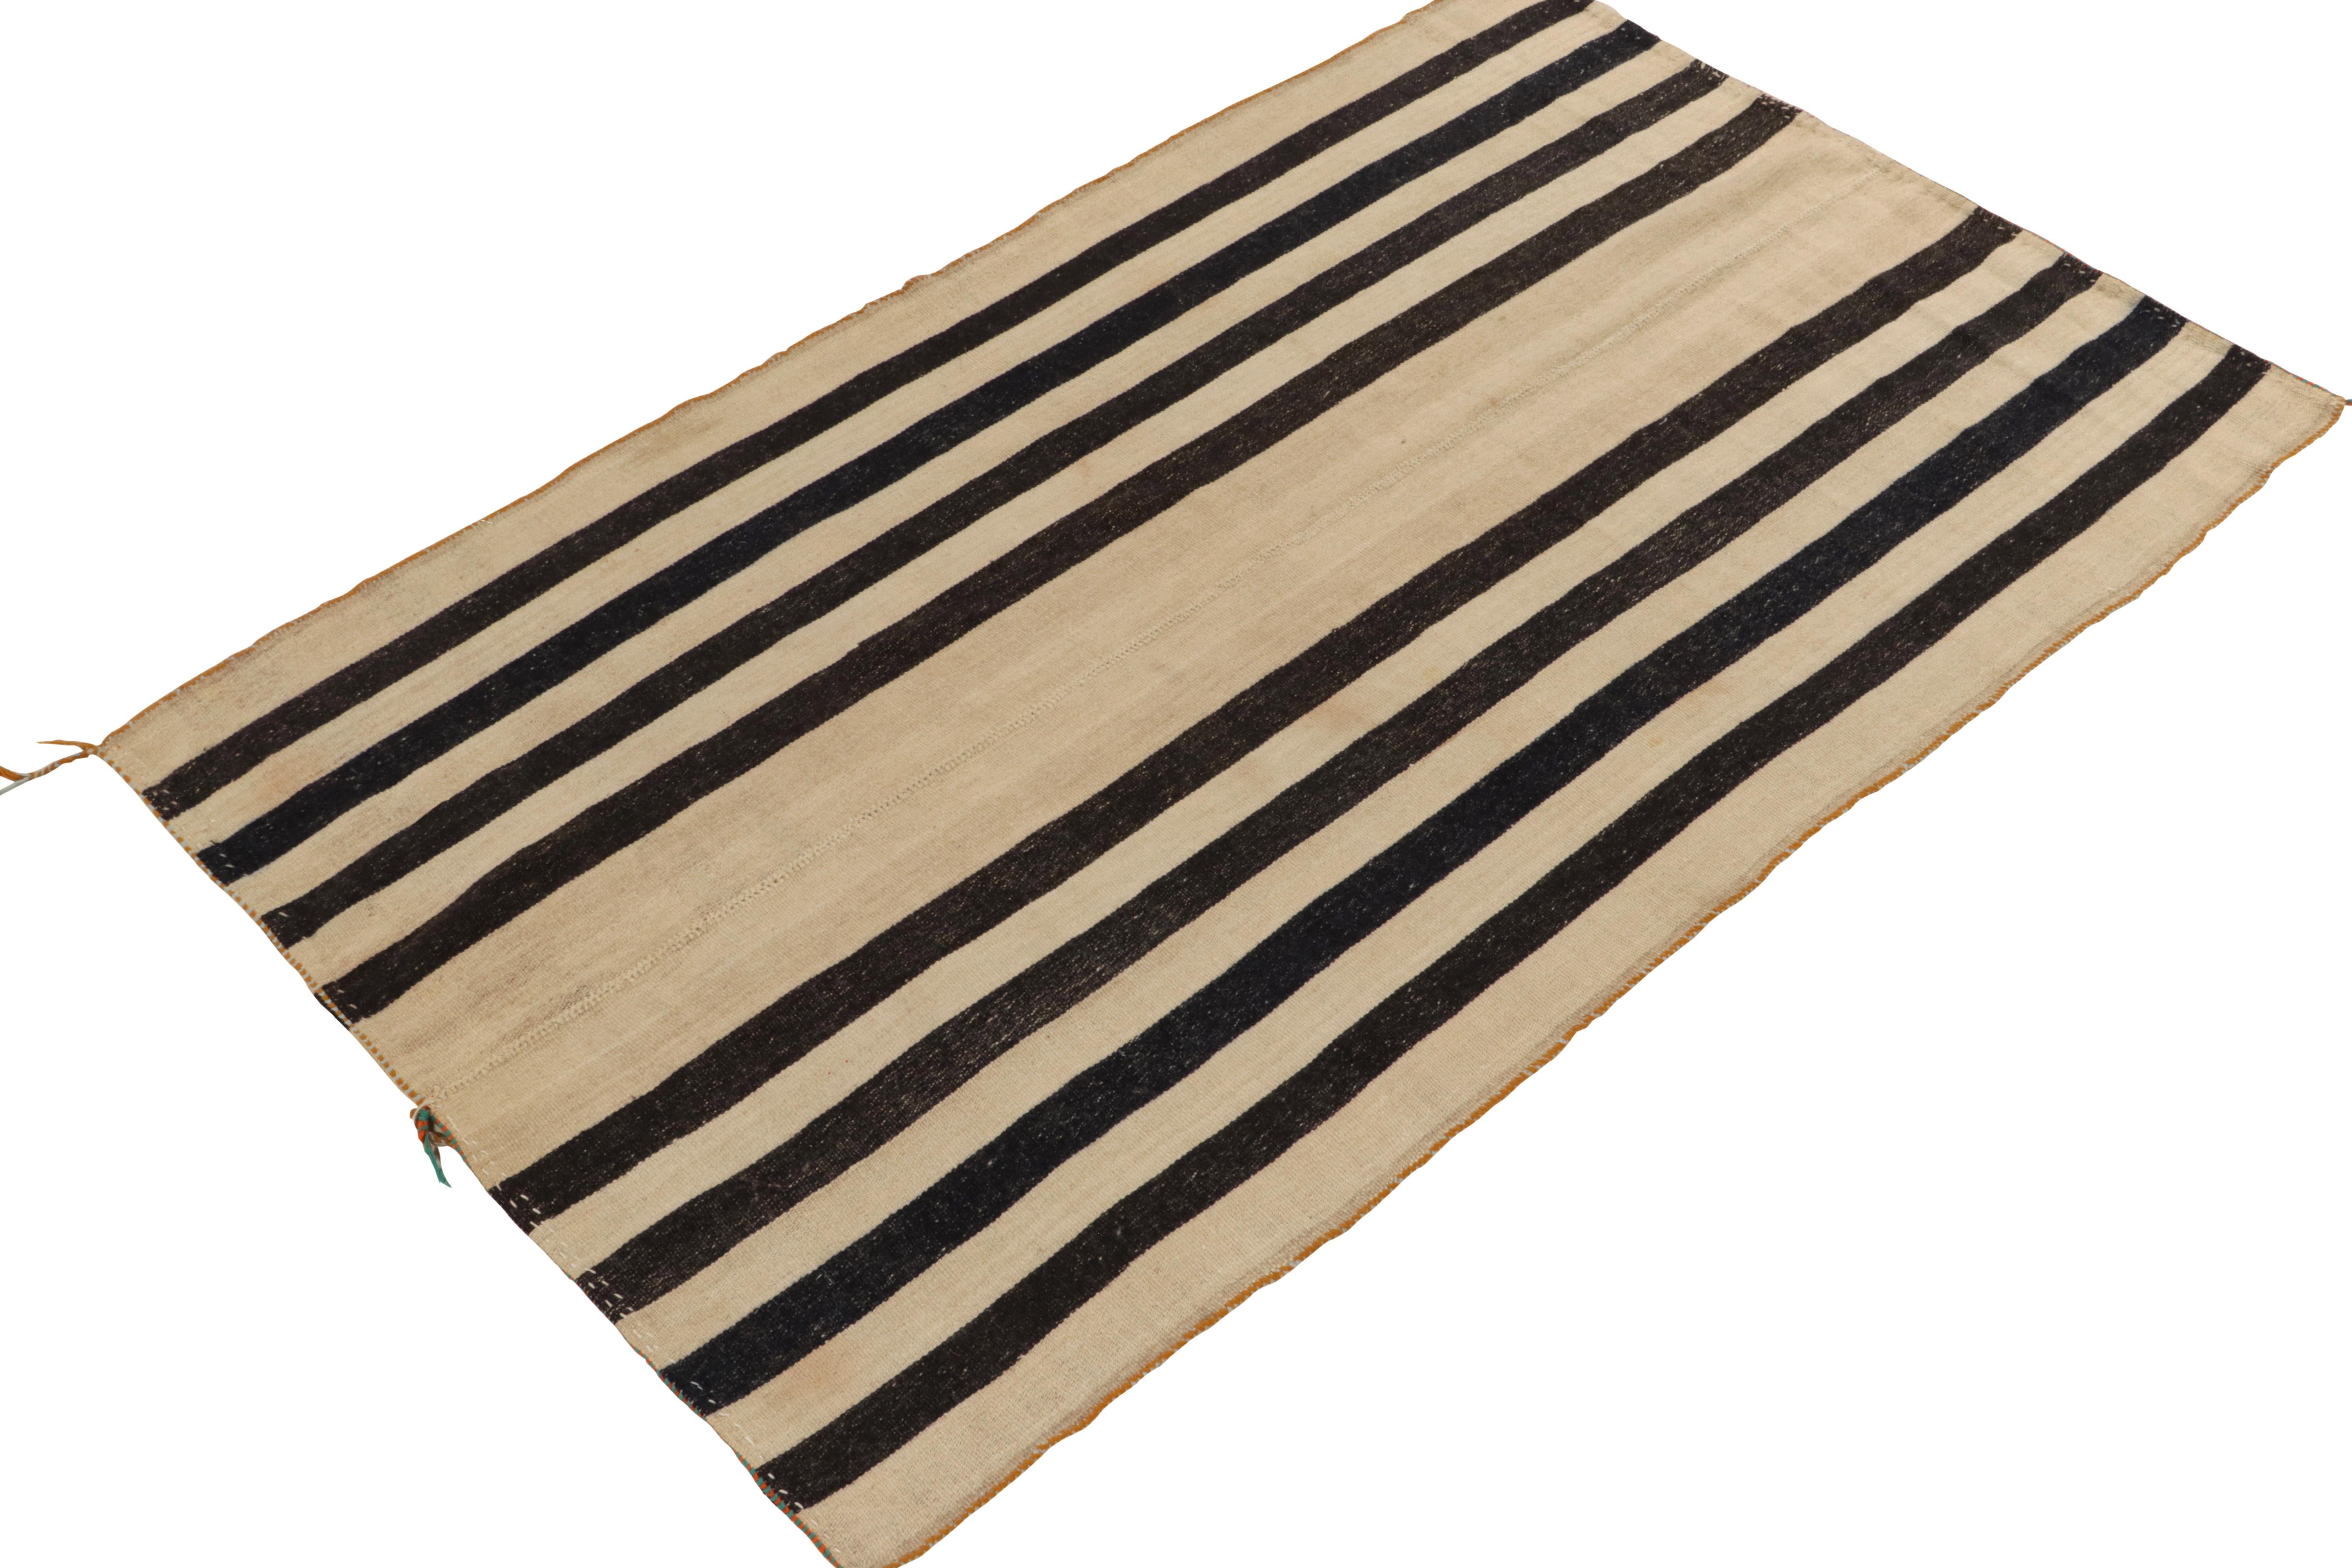 Originating between 1950-1960, a 5x8 vintage kilim rug from Turkey. Handwoven in wool with panel weaving technique, the simple design enjoys a neutral play of beige-brown with black stripes, complemented by mild elements of embroidery. Prevailing in